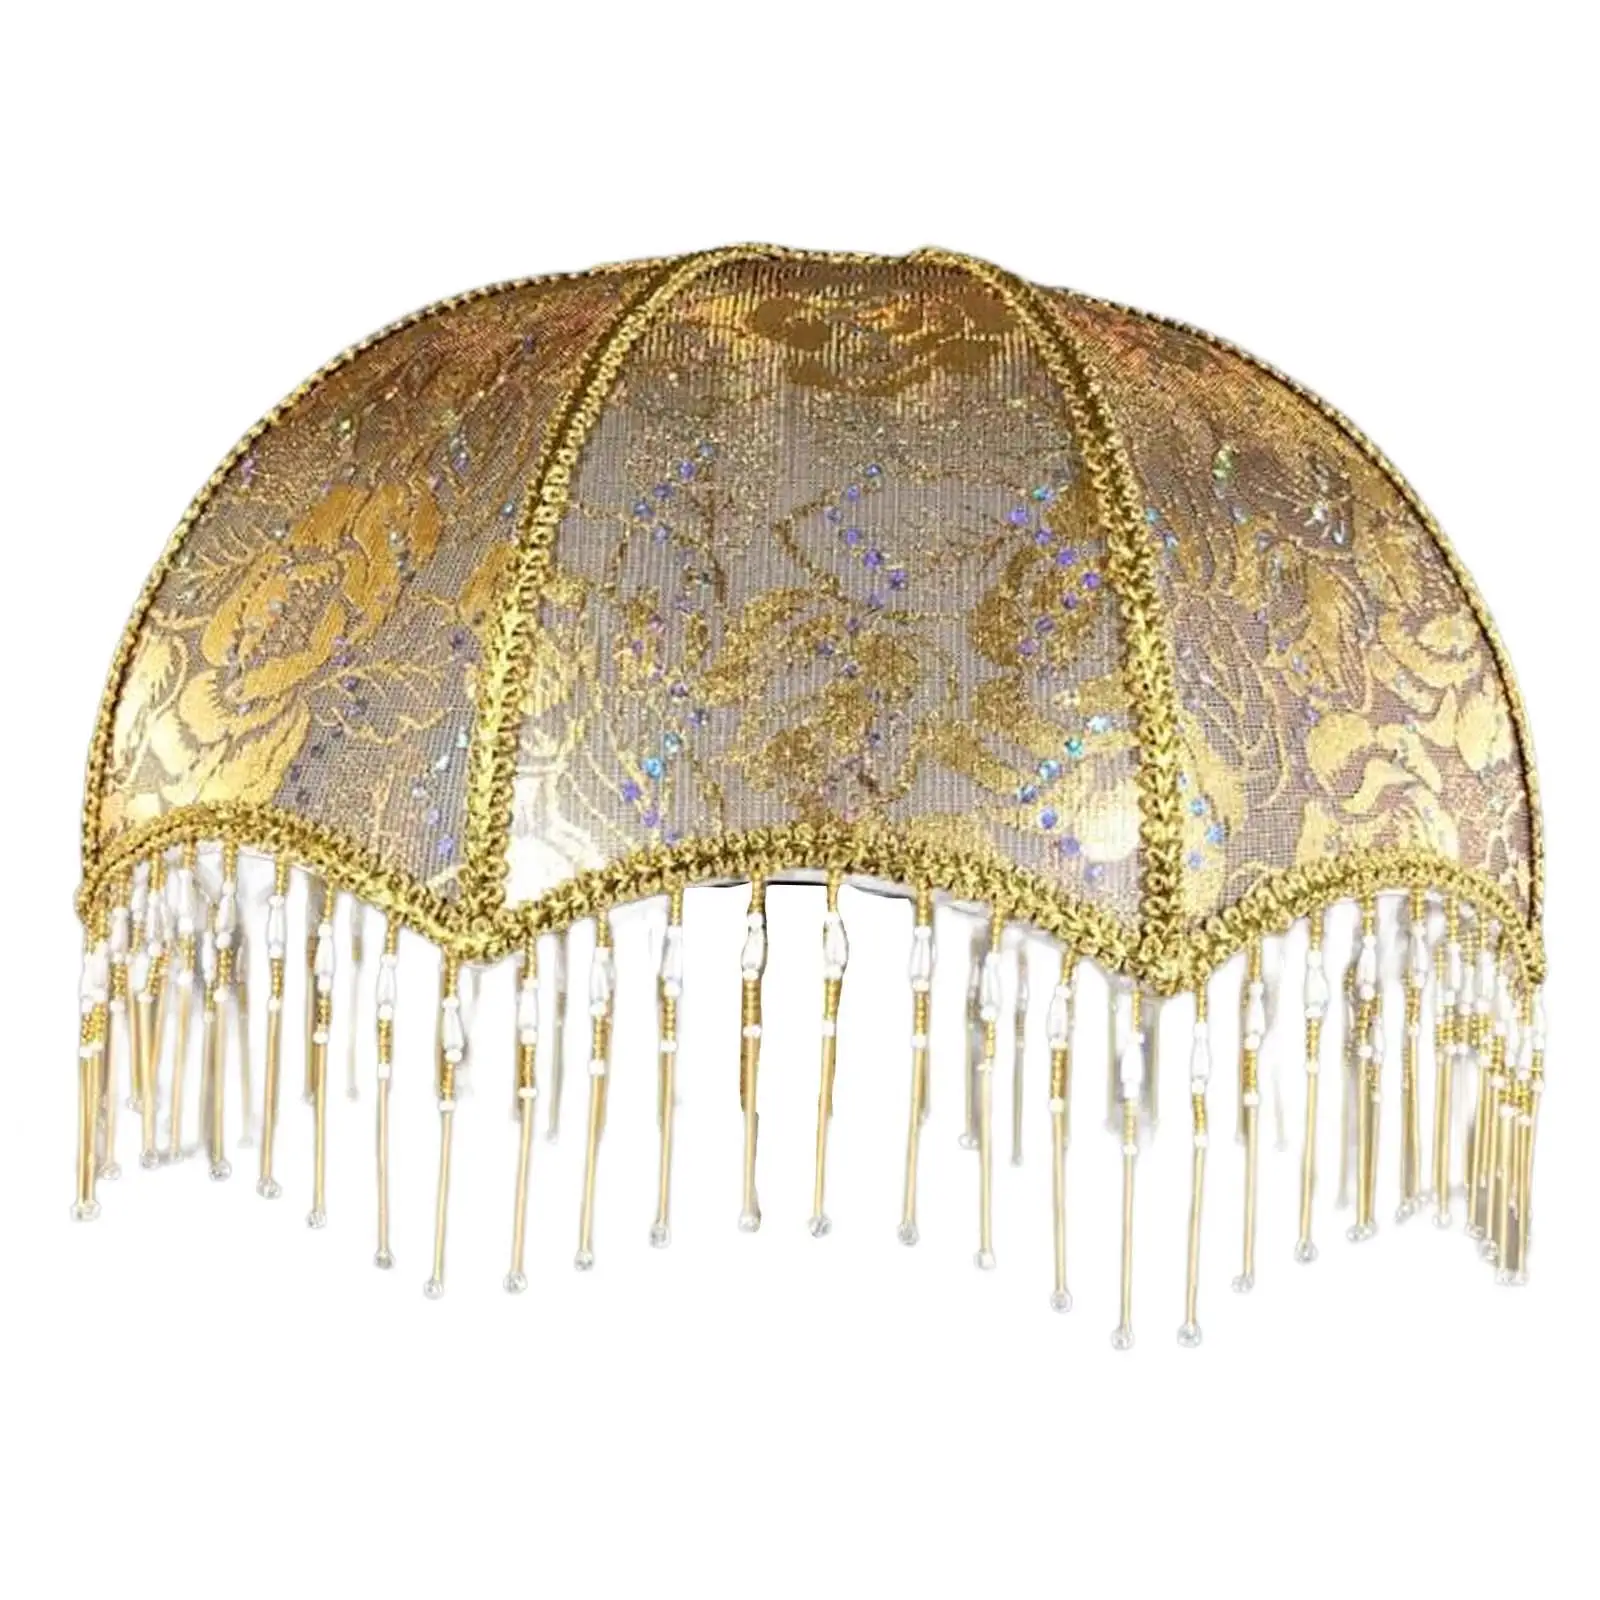 Replacement Dome Table Lampshade Cover with Tassel for Bedside Lamps Elegant